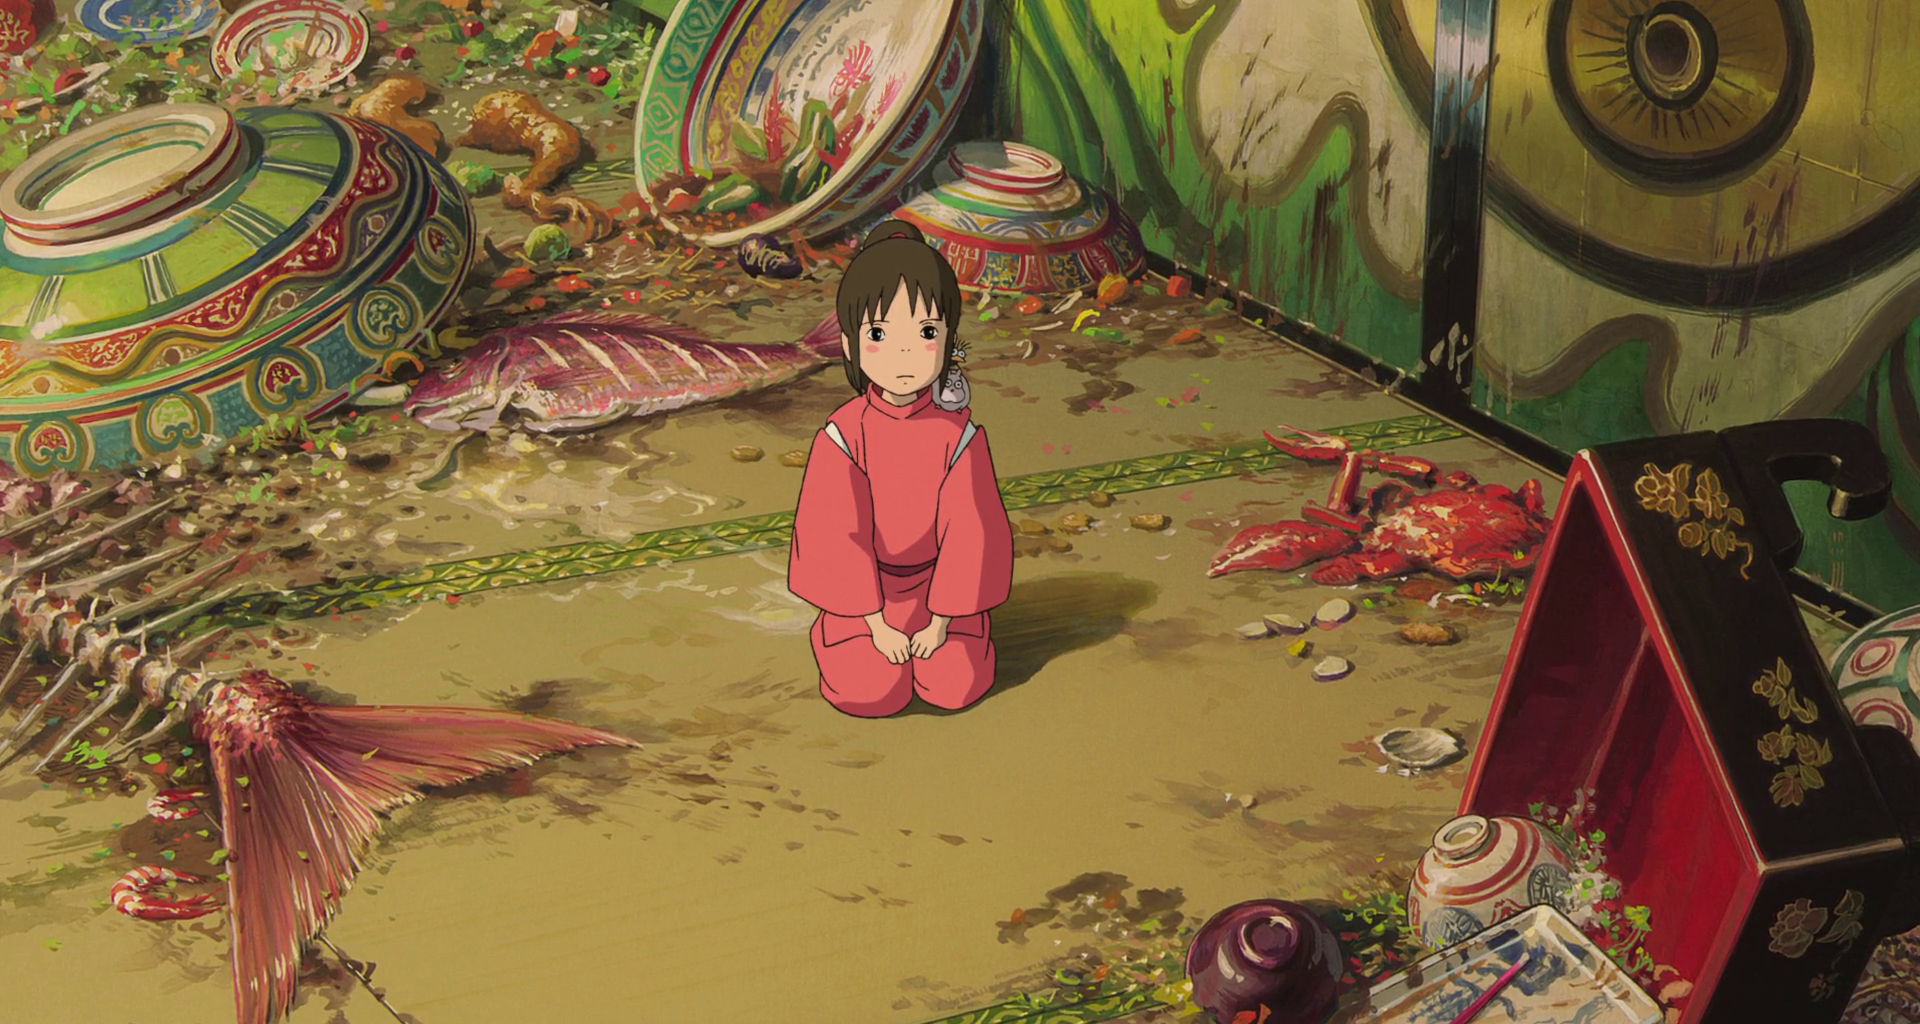 Shot from the movie Spirited Away, made in 2001